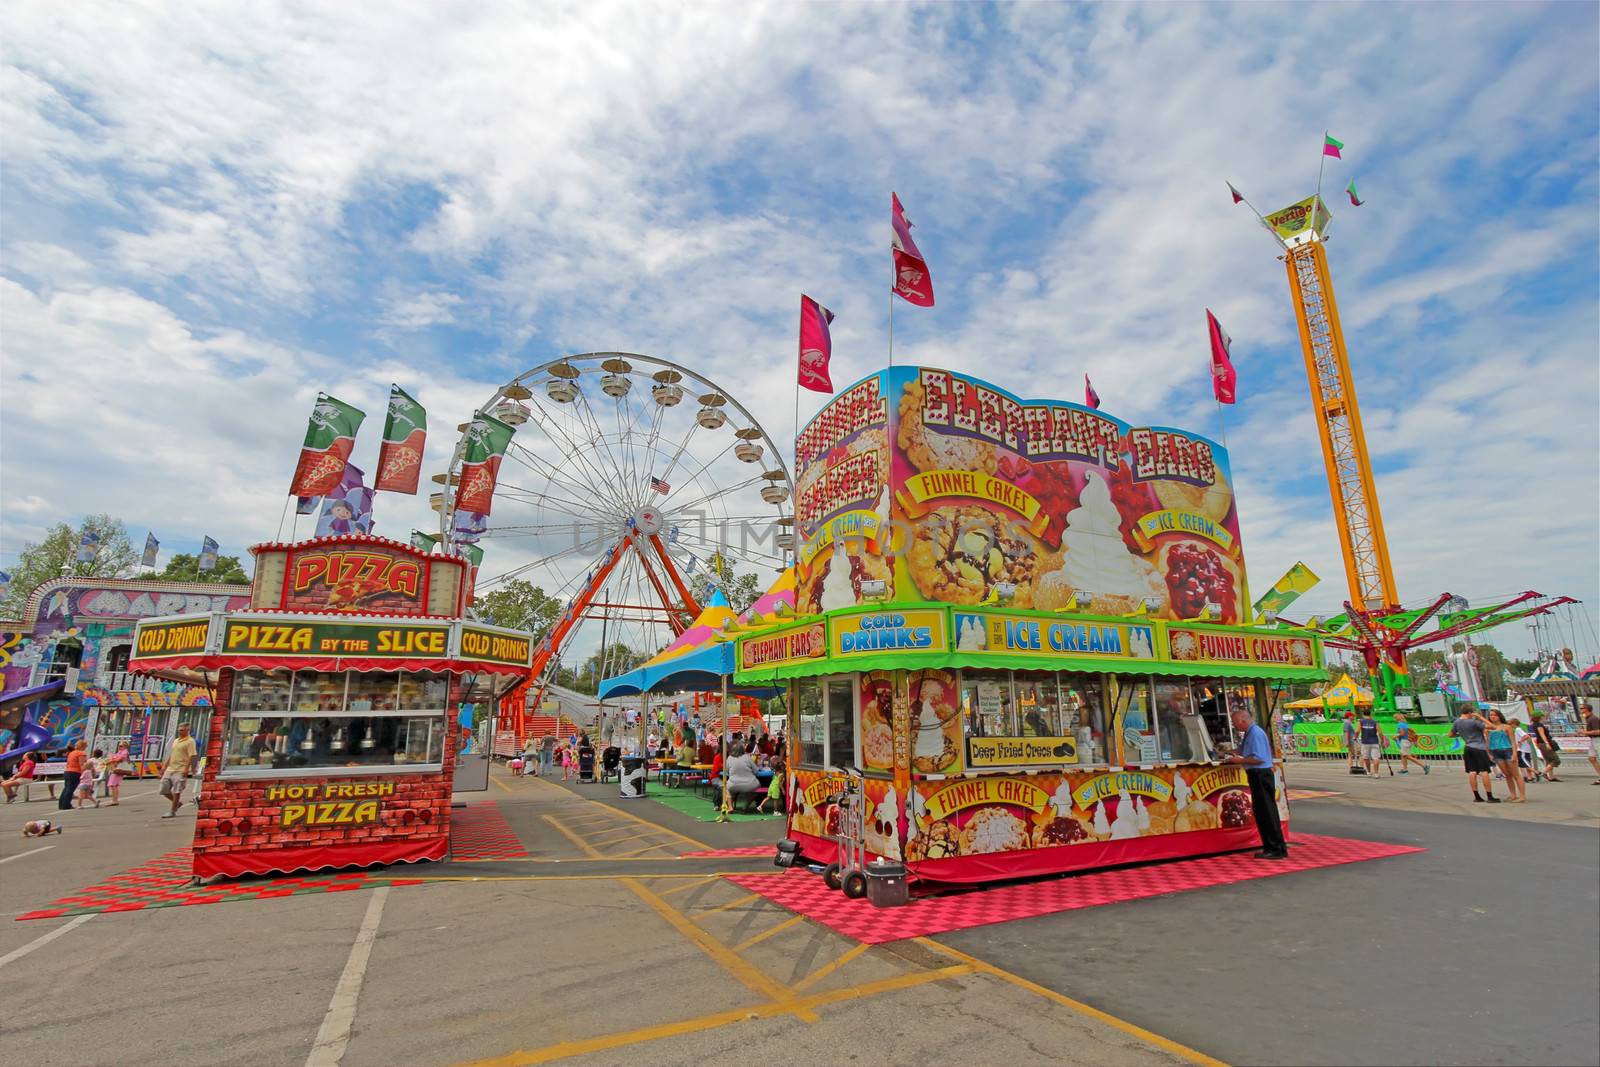 INDIANAPOLIS, INDIANA - AUGUST 12: Vendors and rides on the Midway at the Indiana State Fair on August 12, 2012. This very popular fair hosts more than 850,000 people every August.